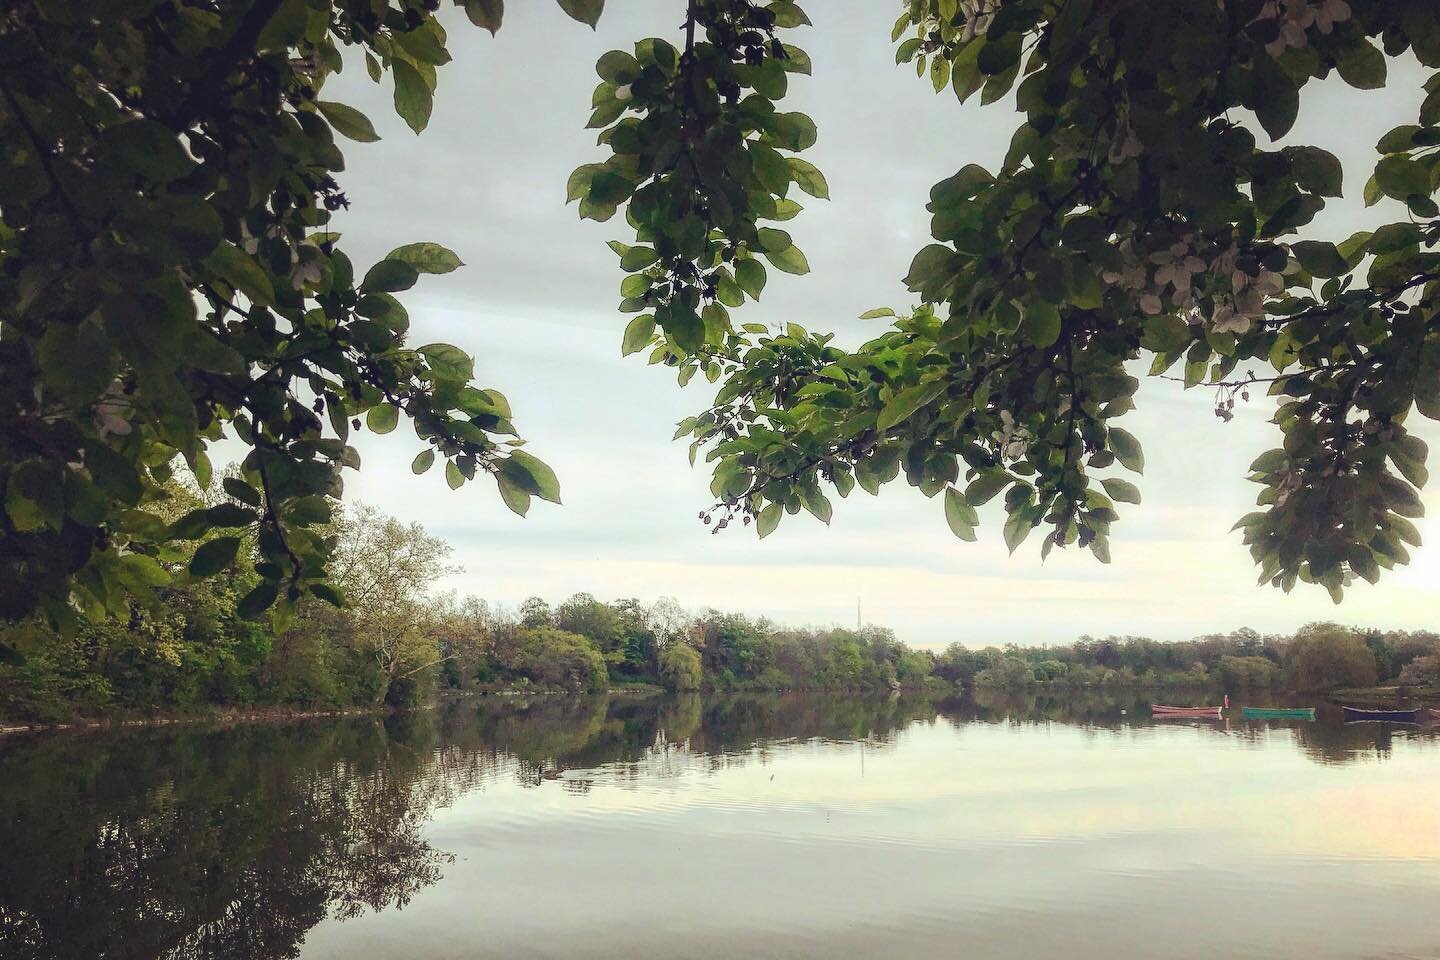 Beauty just a 10 minute jog from home. ❤️
.
.
.
#landscapephotography #hoytlake #summertime #naturephotography #lake #olmstead #buffalony